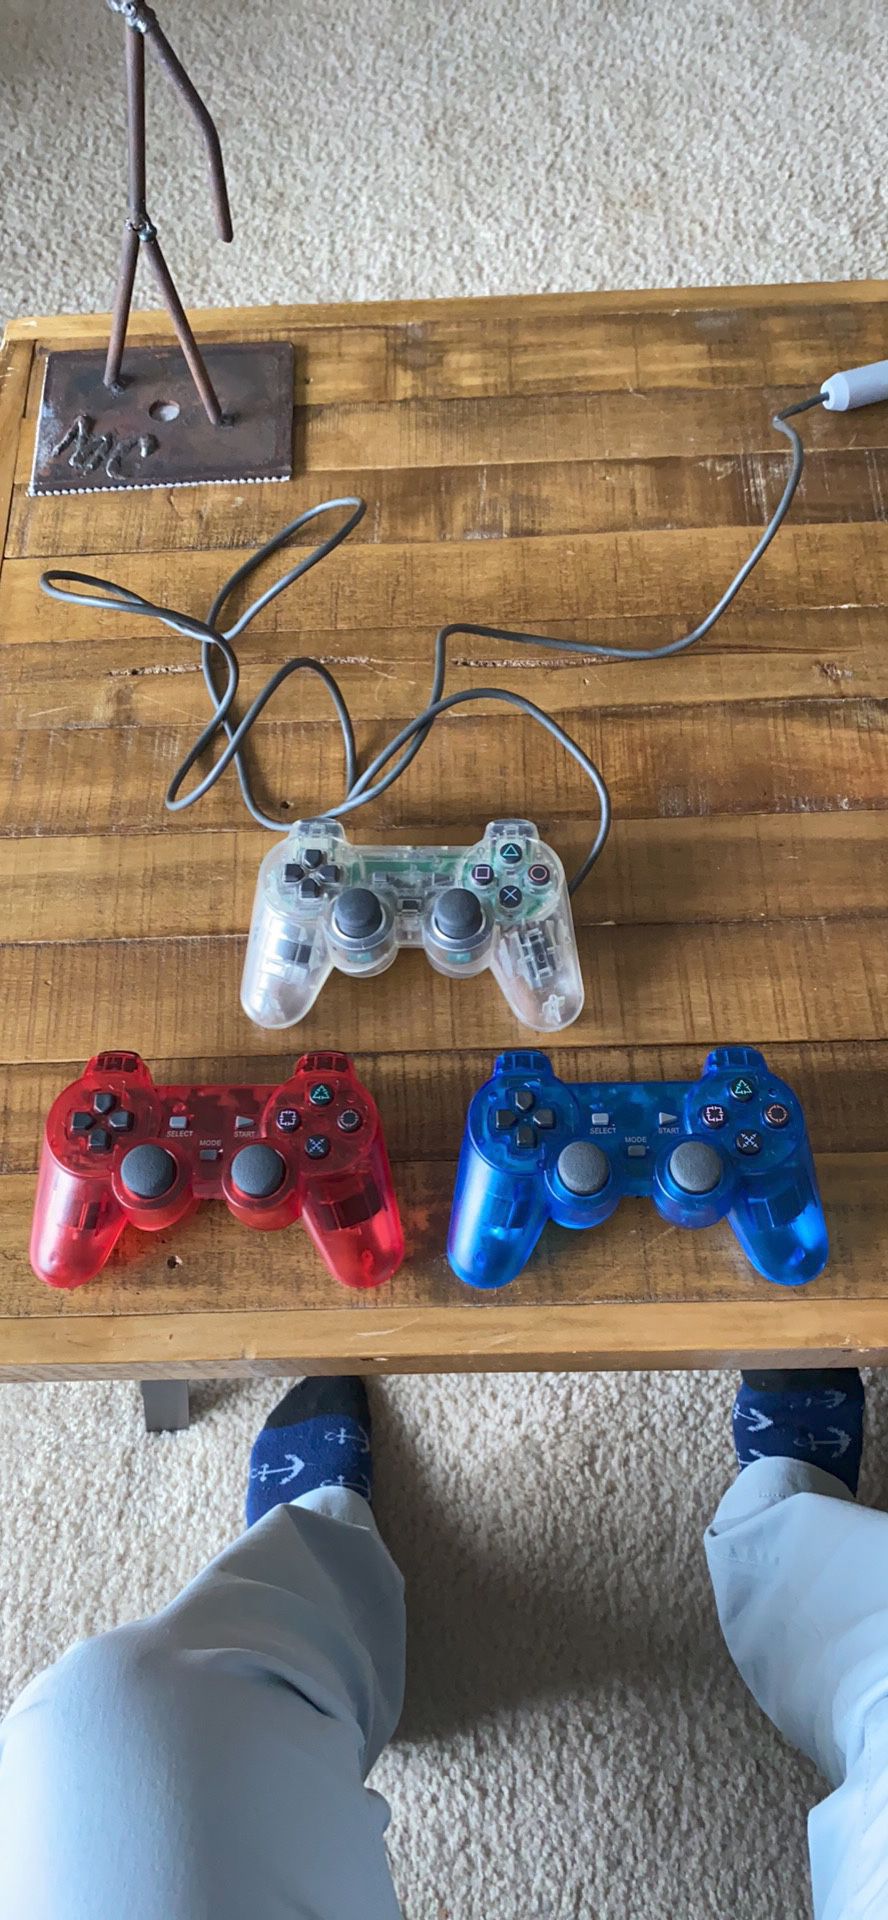 Ps2 controllers